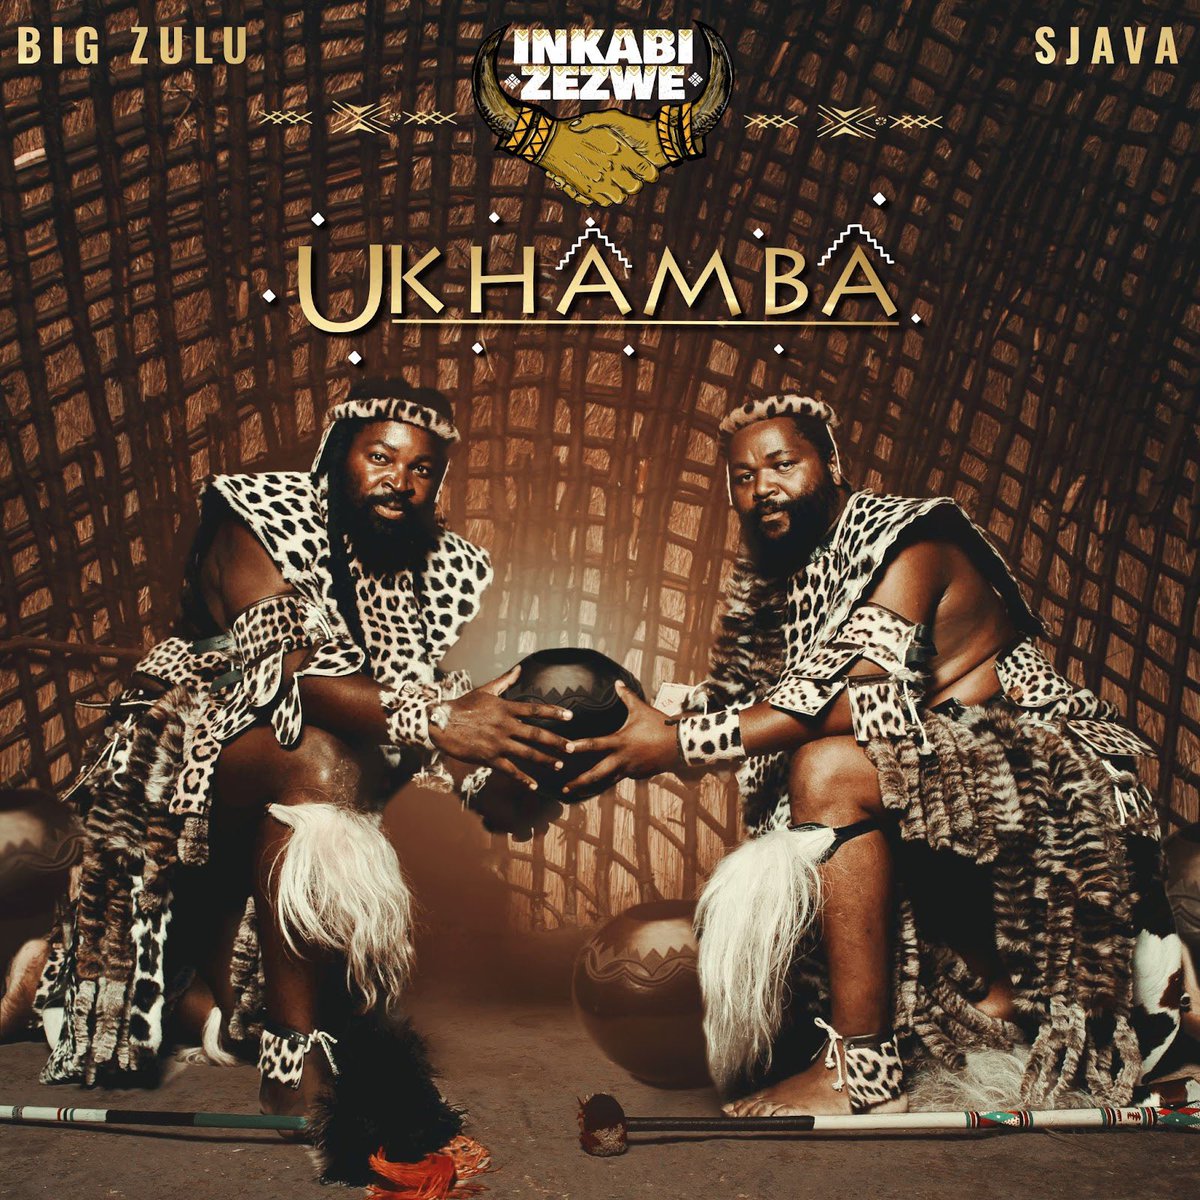 MUSIC: Inkabi Zezwe celebrates 1 Year anniversary of 'Ukhamba' Album Ukhamba has racked up 53 million streams since its release a year ago. The album’s first single, ‘Umbayimbayi’, achieved platinum status in a mere two and a half weeks after its release, and currently